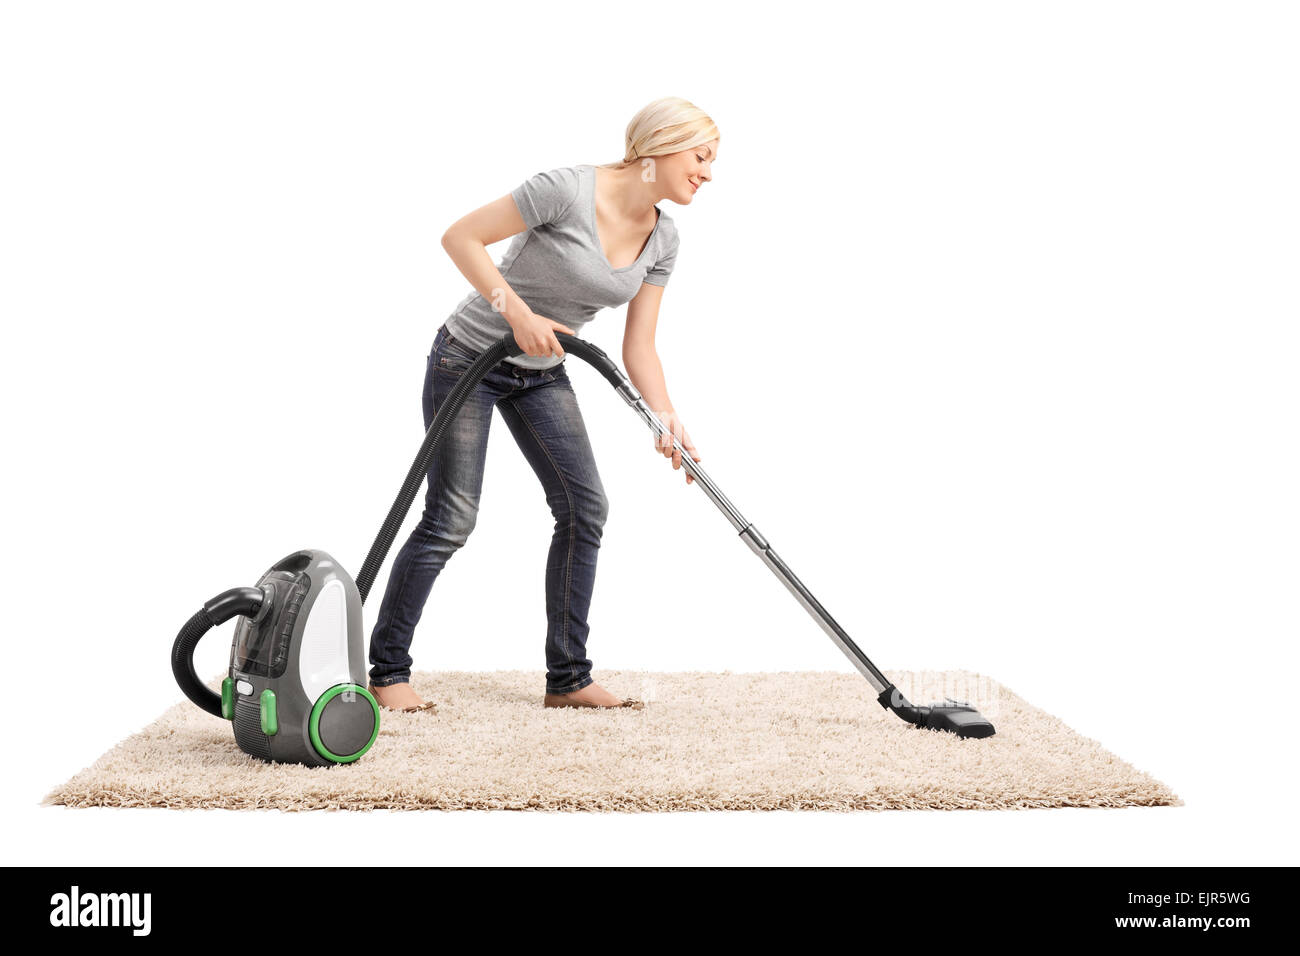 Full length portrait of a woman vacuuming a beige colored carpet with a vacuum cleaner isolated on white background Stock Photo